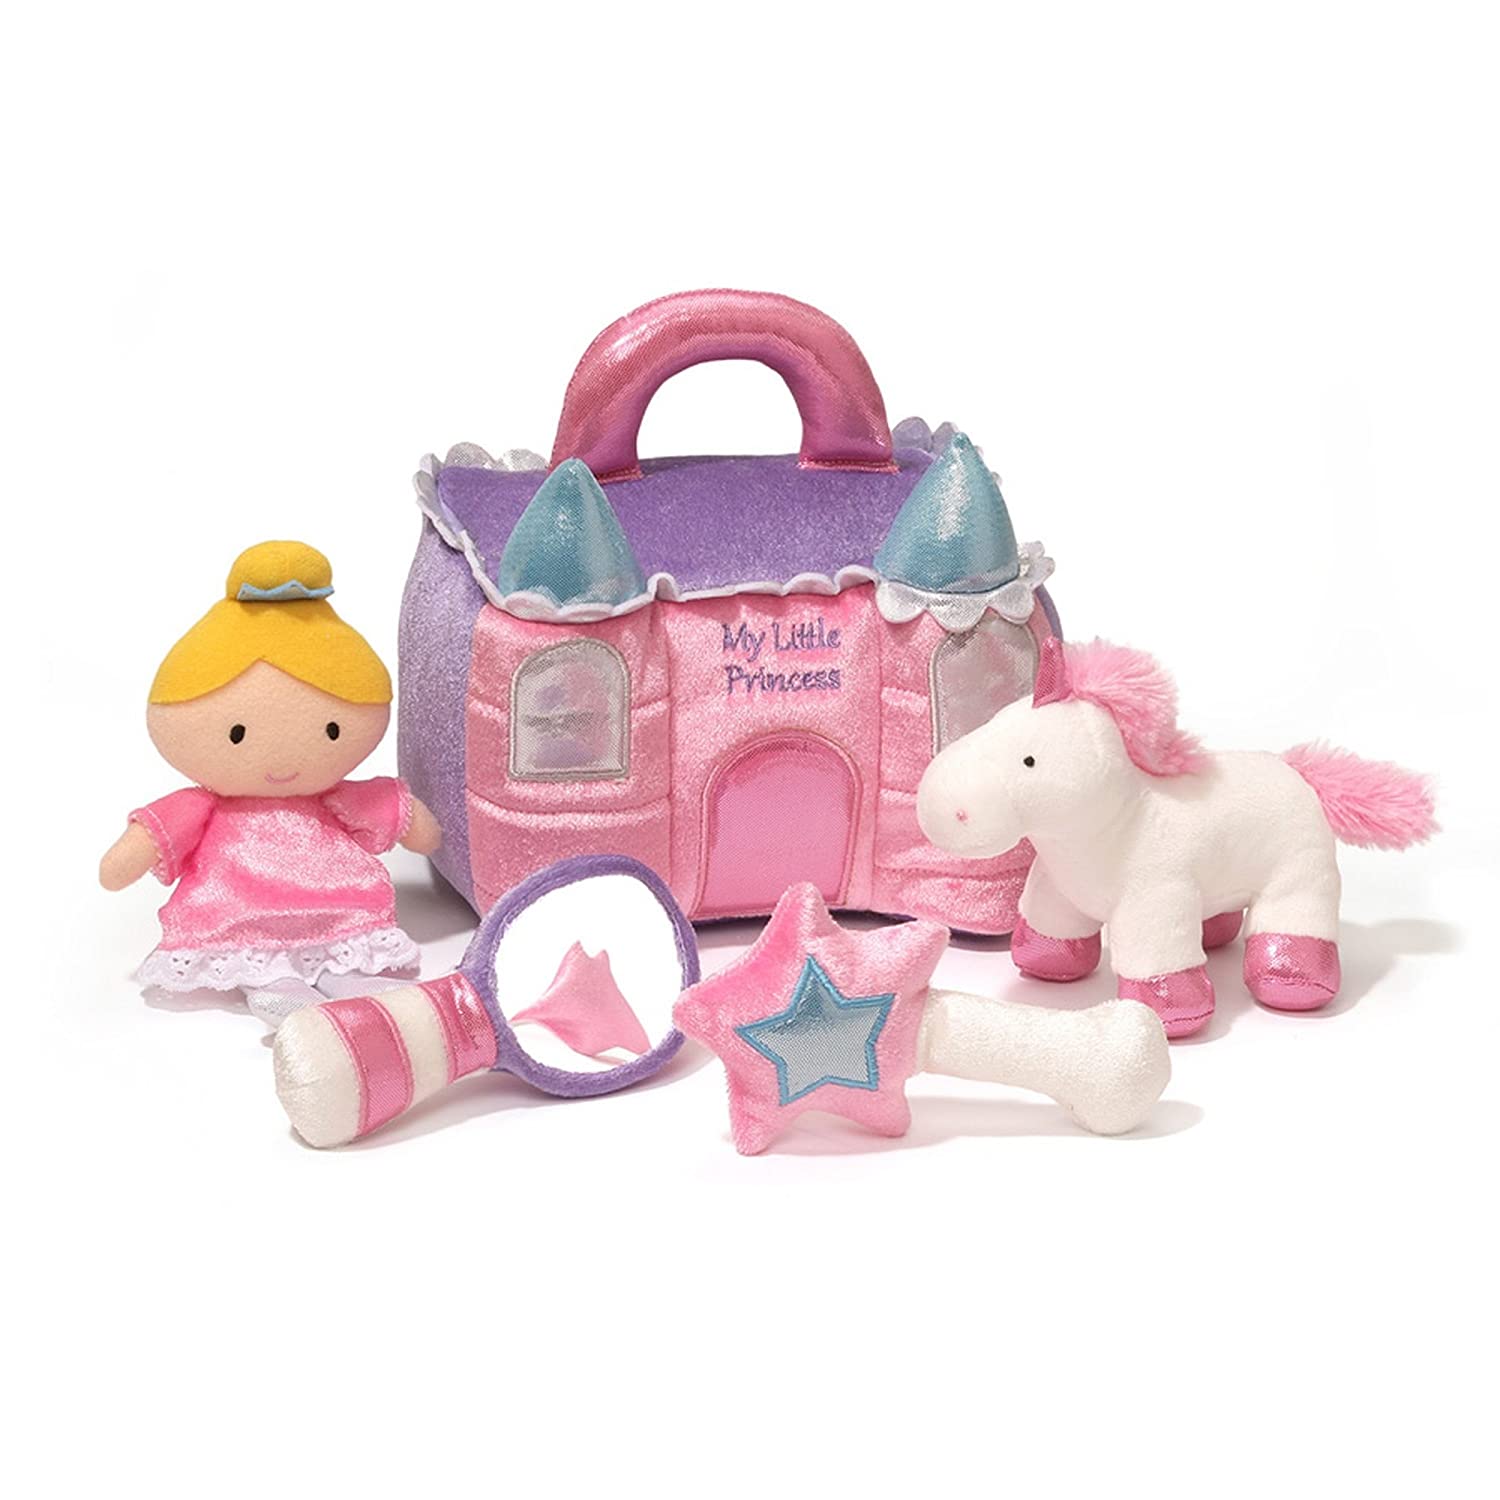 23 Best Unicorn Toys and Gifts for Girls 2022 - Review & Buying Guide 12